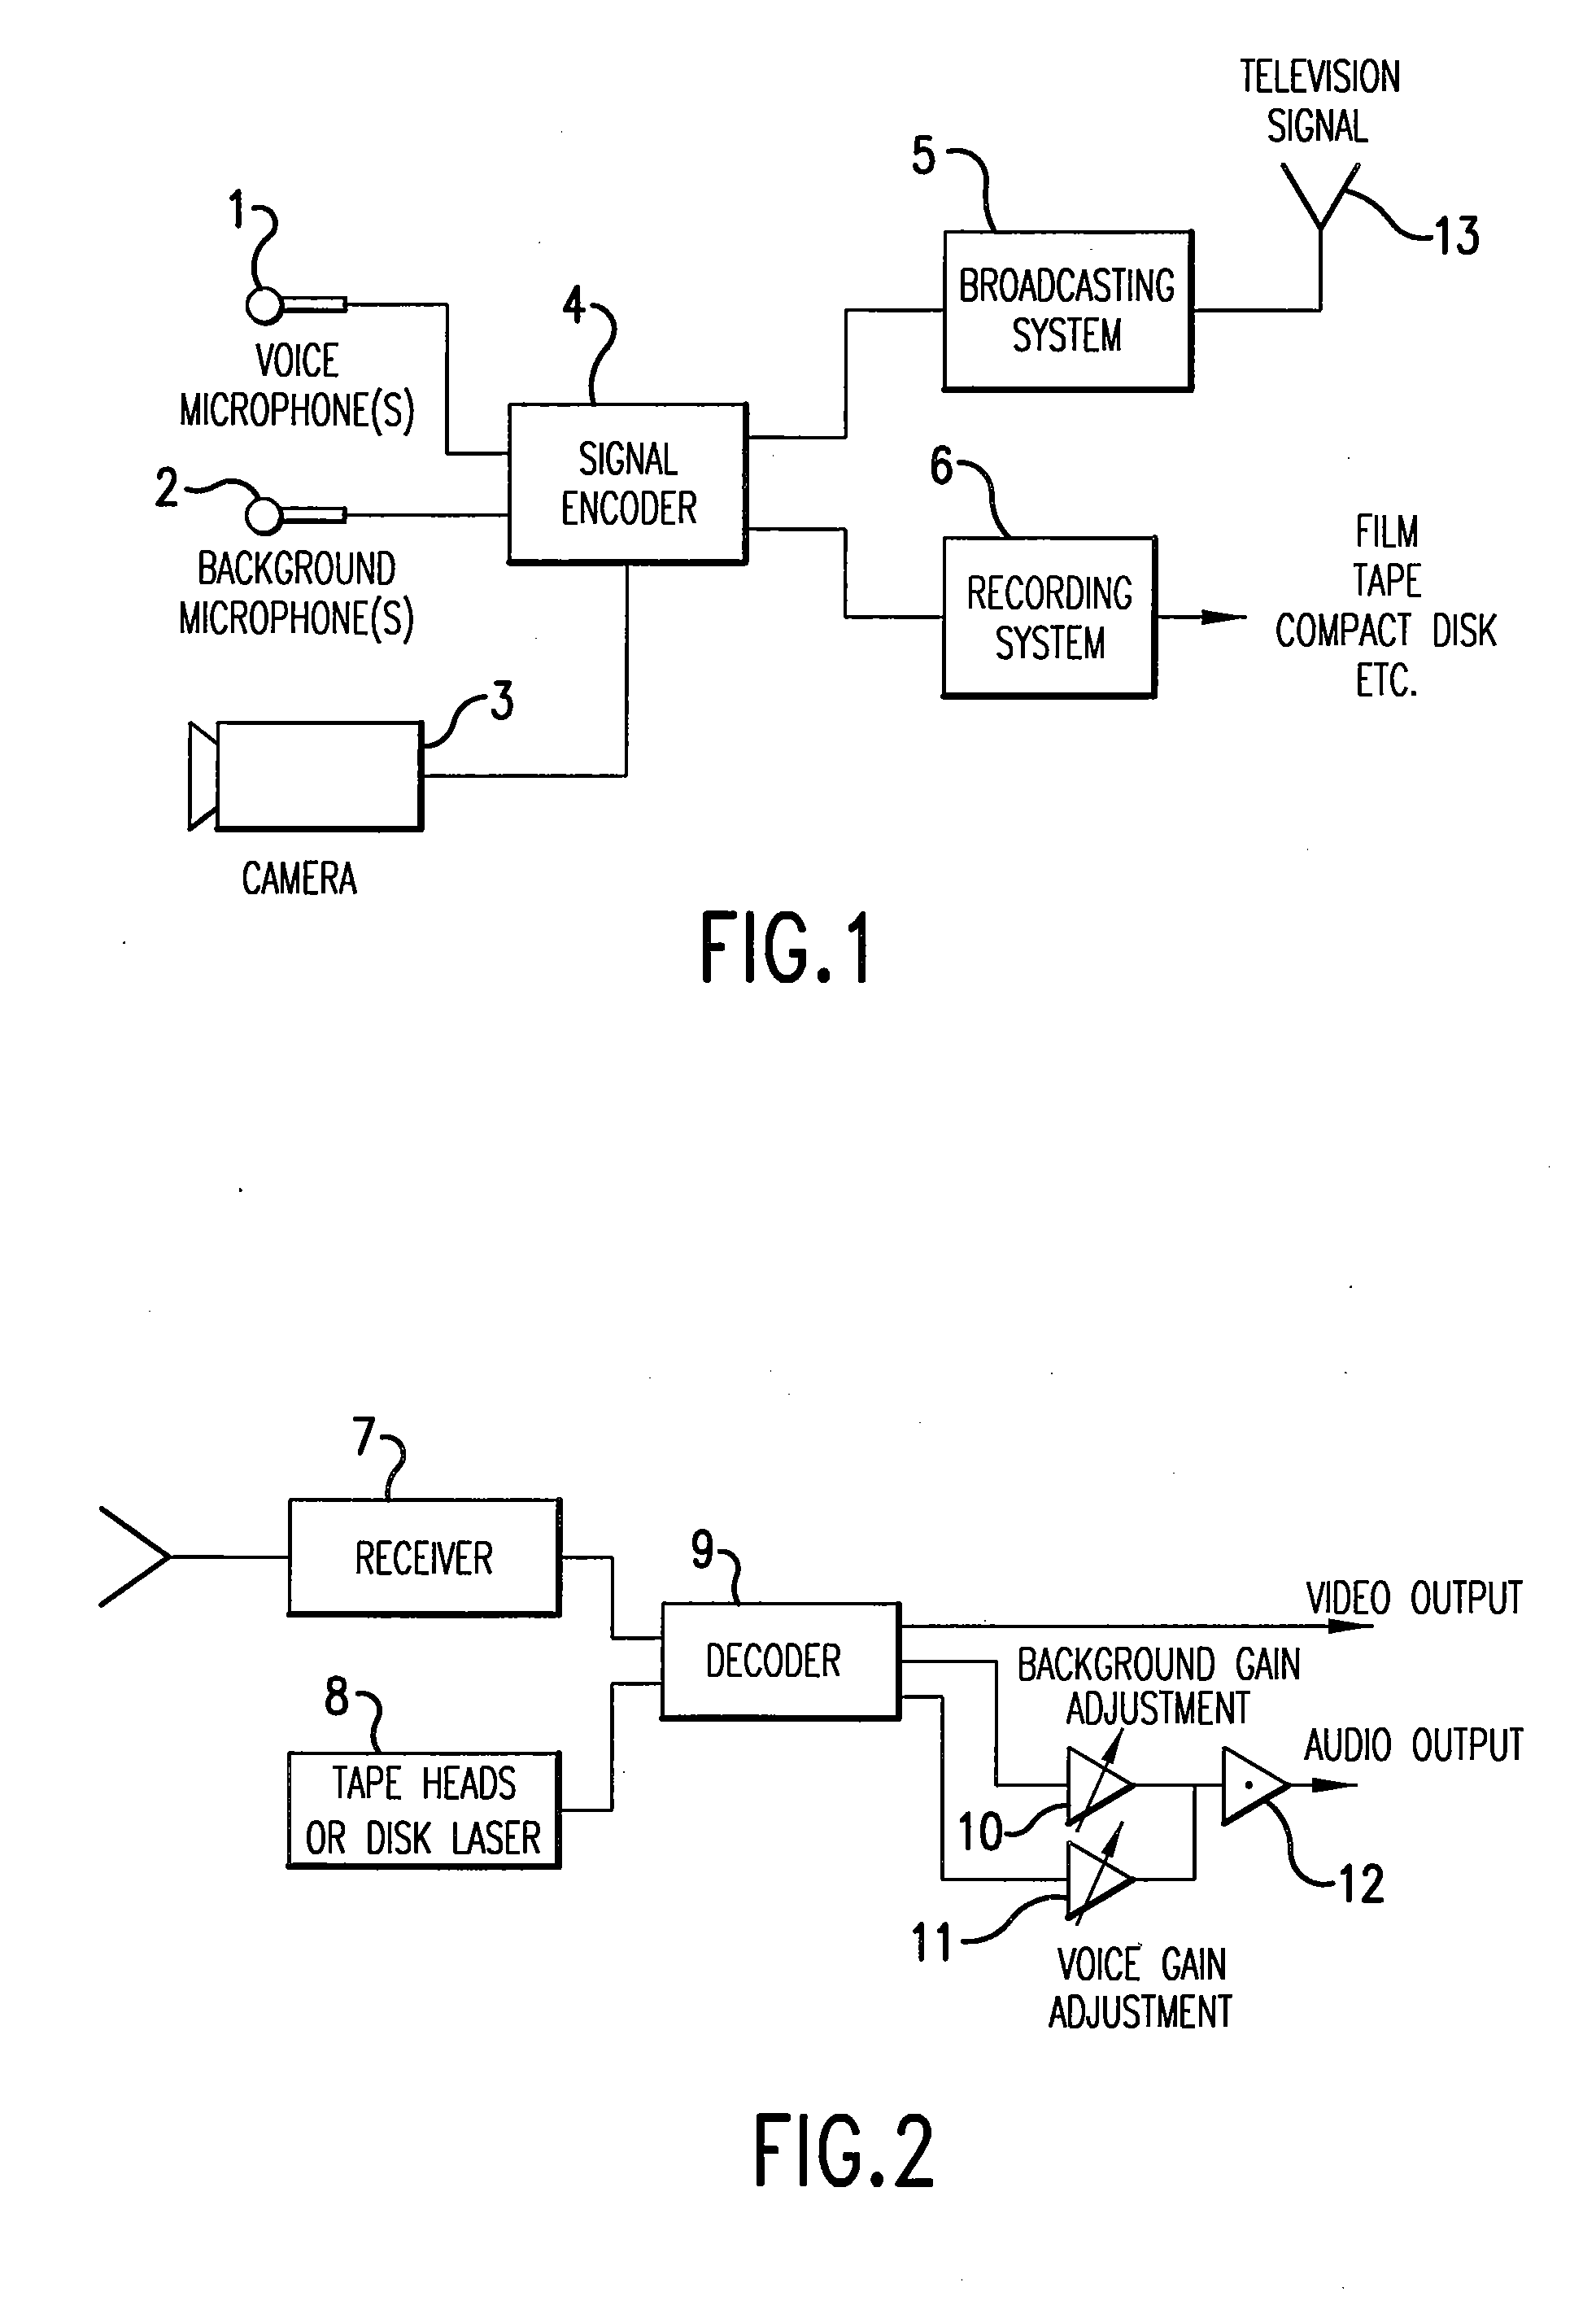 User adjustable volume control that accommodates hearing